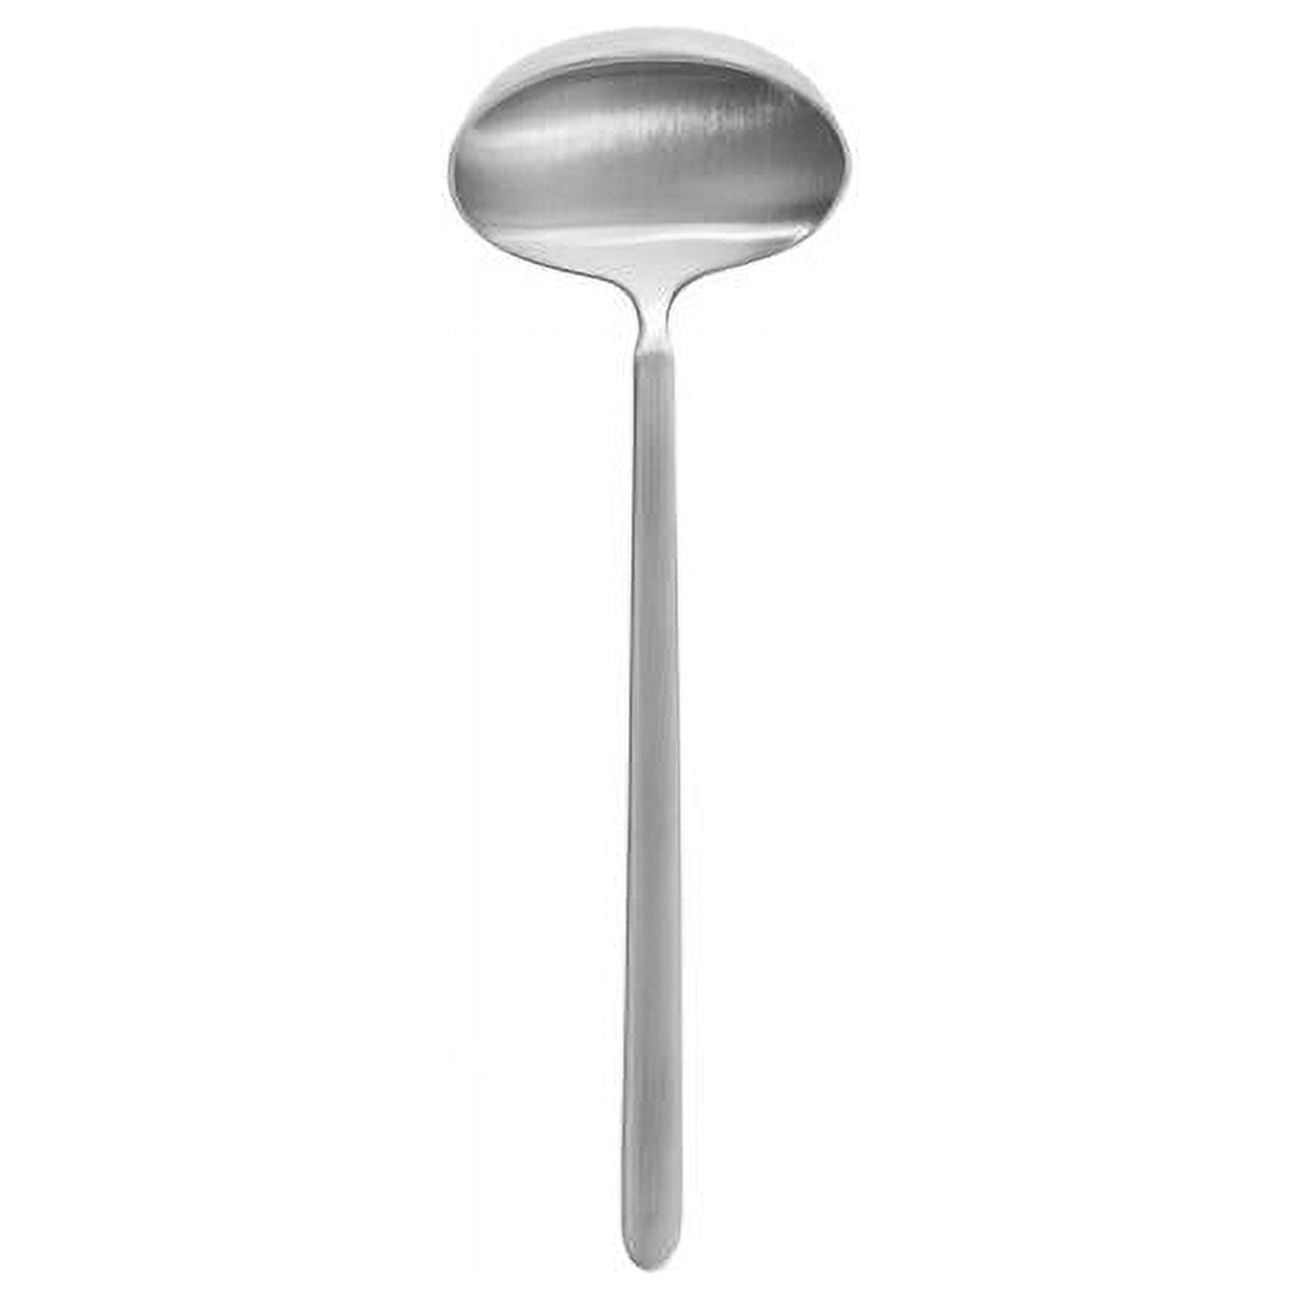 Picture of Blomus 63948 8 x 2 x 2.8 in. Stella Stainless Steel Sauce Spoon